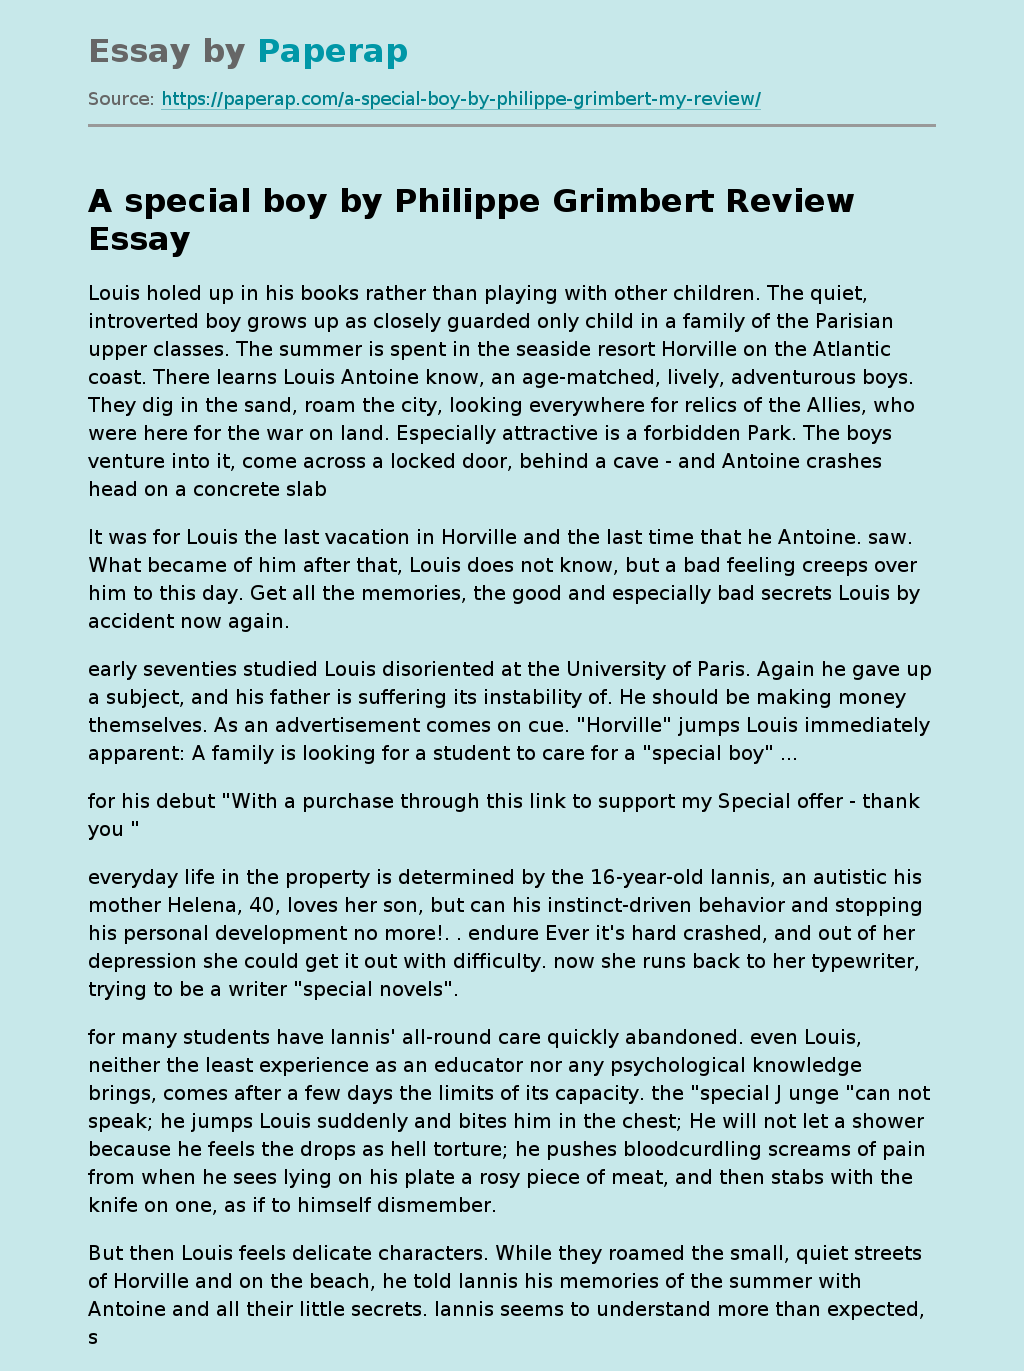 A special boy by Philippe Grimbert Review